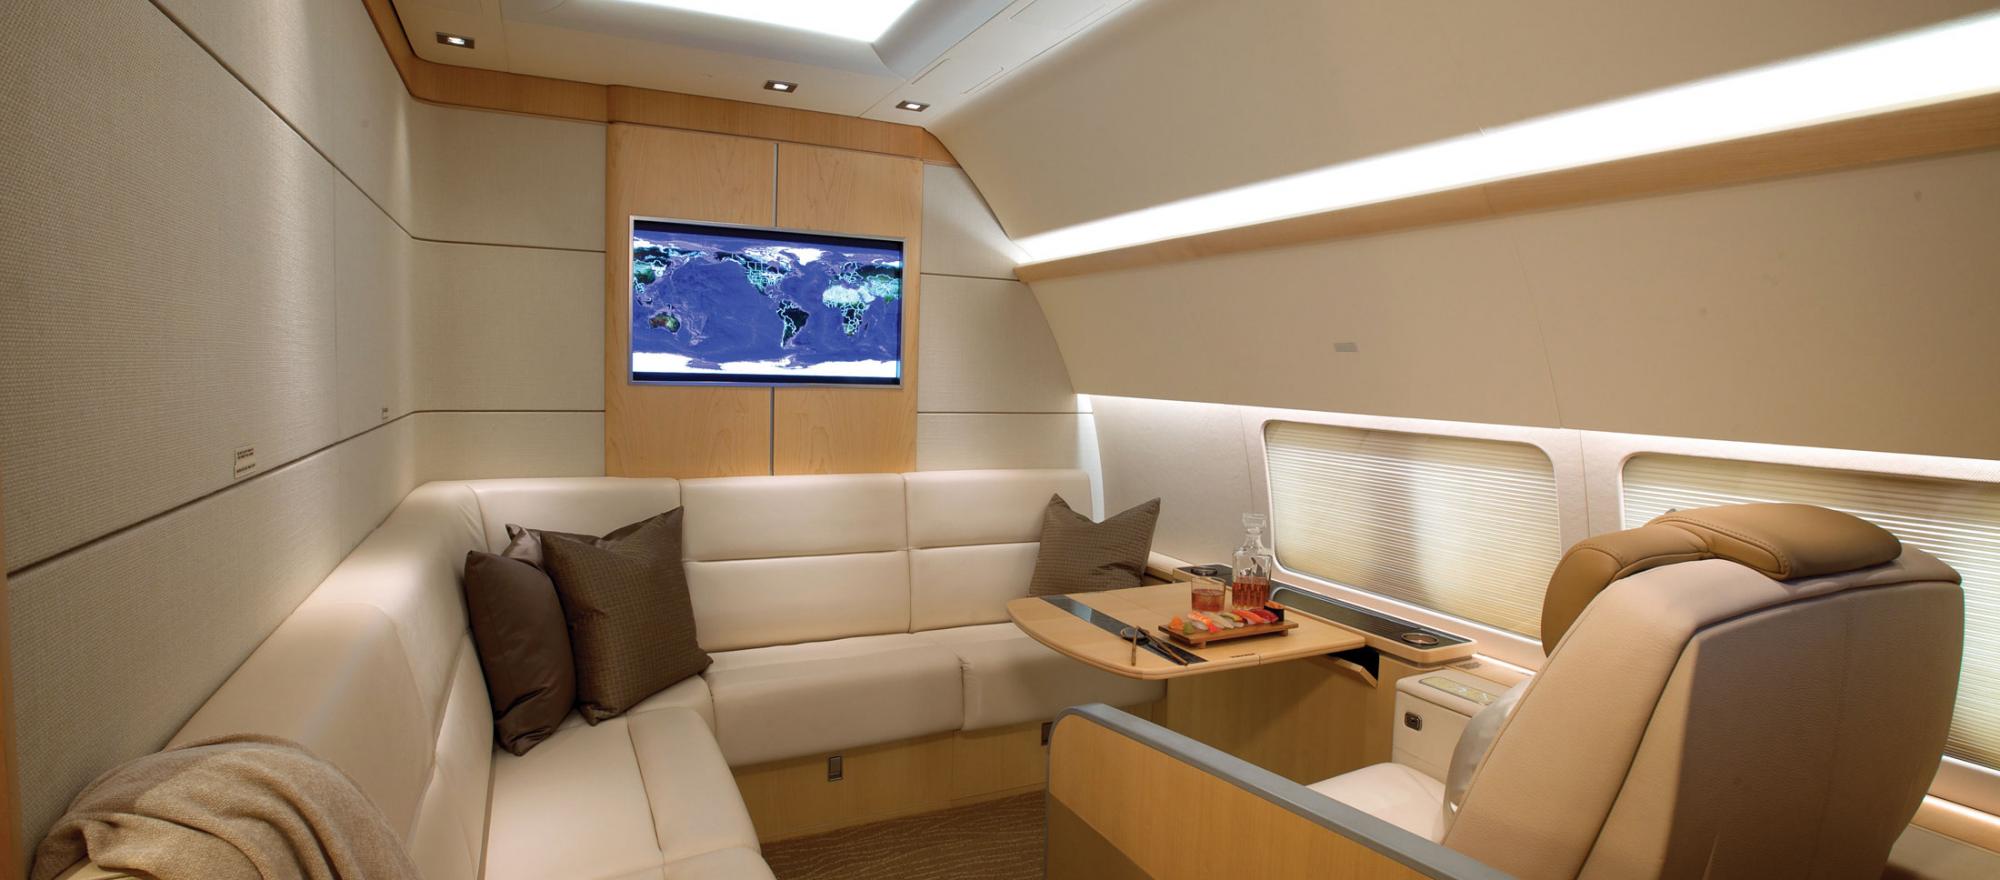 Luxury interior of a Boeing BBJ with pod seats.